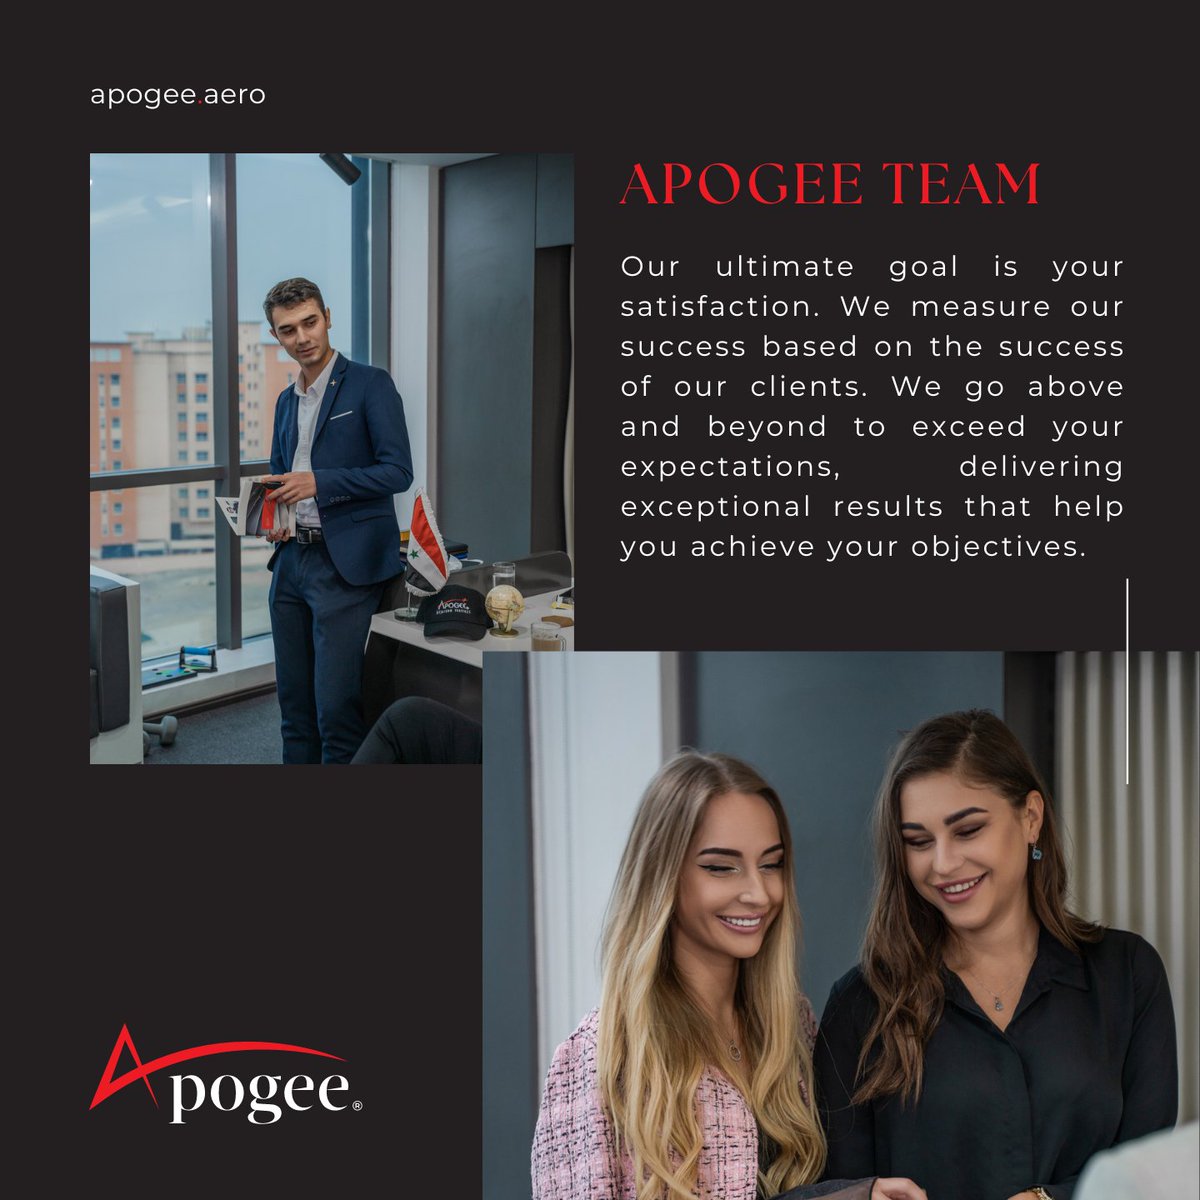 Let us be your trusted team!

#apogee #tripsupport #aviation #charter #groundhandling #flightplanning #privateflight #cargoflight #ambulanceflight #militaryflight #techstop #travel #experience #safety #team #quality #serviceexcellence #sales #socialmedia #aircraft #airtravel